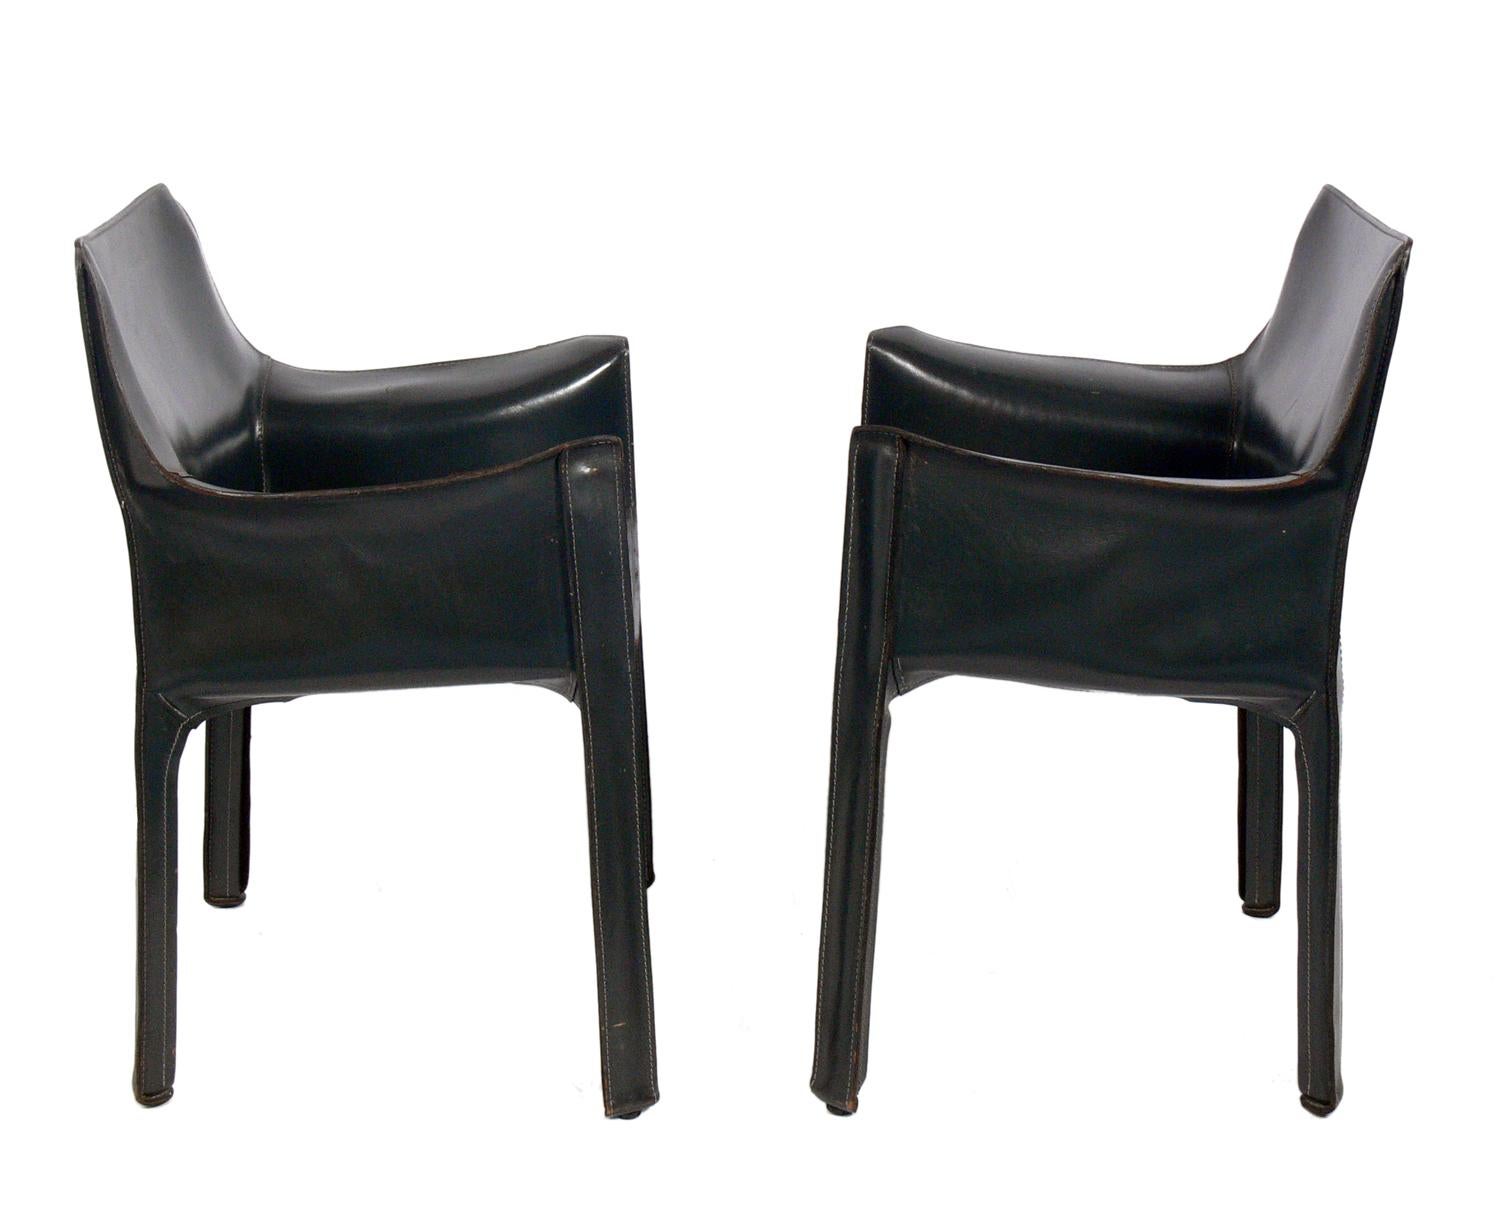 Mid-Century Modern Pair of Charcoal Gray Leather Cab Chairs by Mario Bellini for Cassina